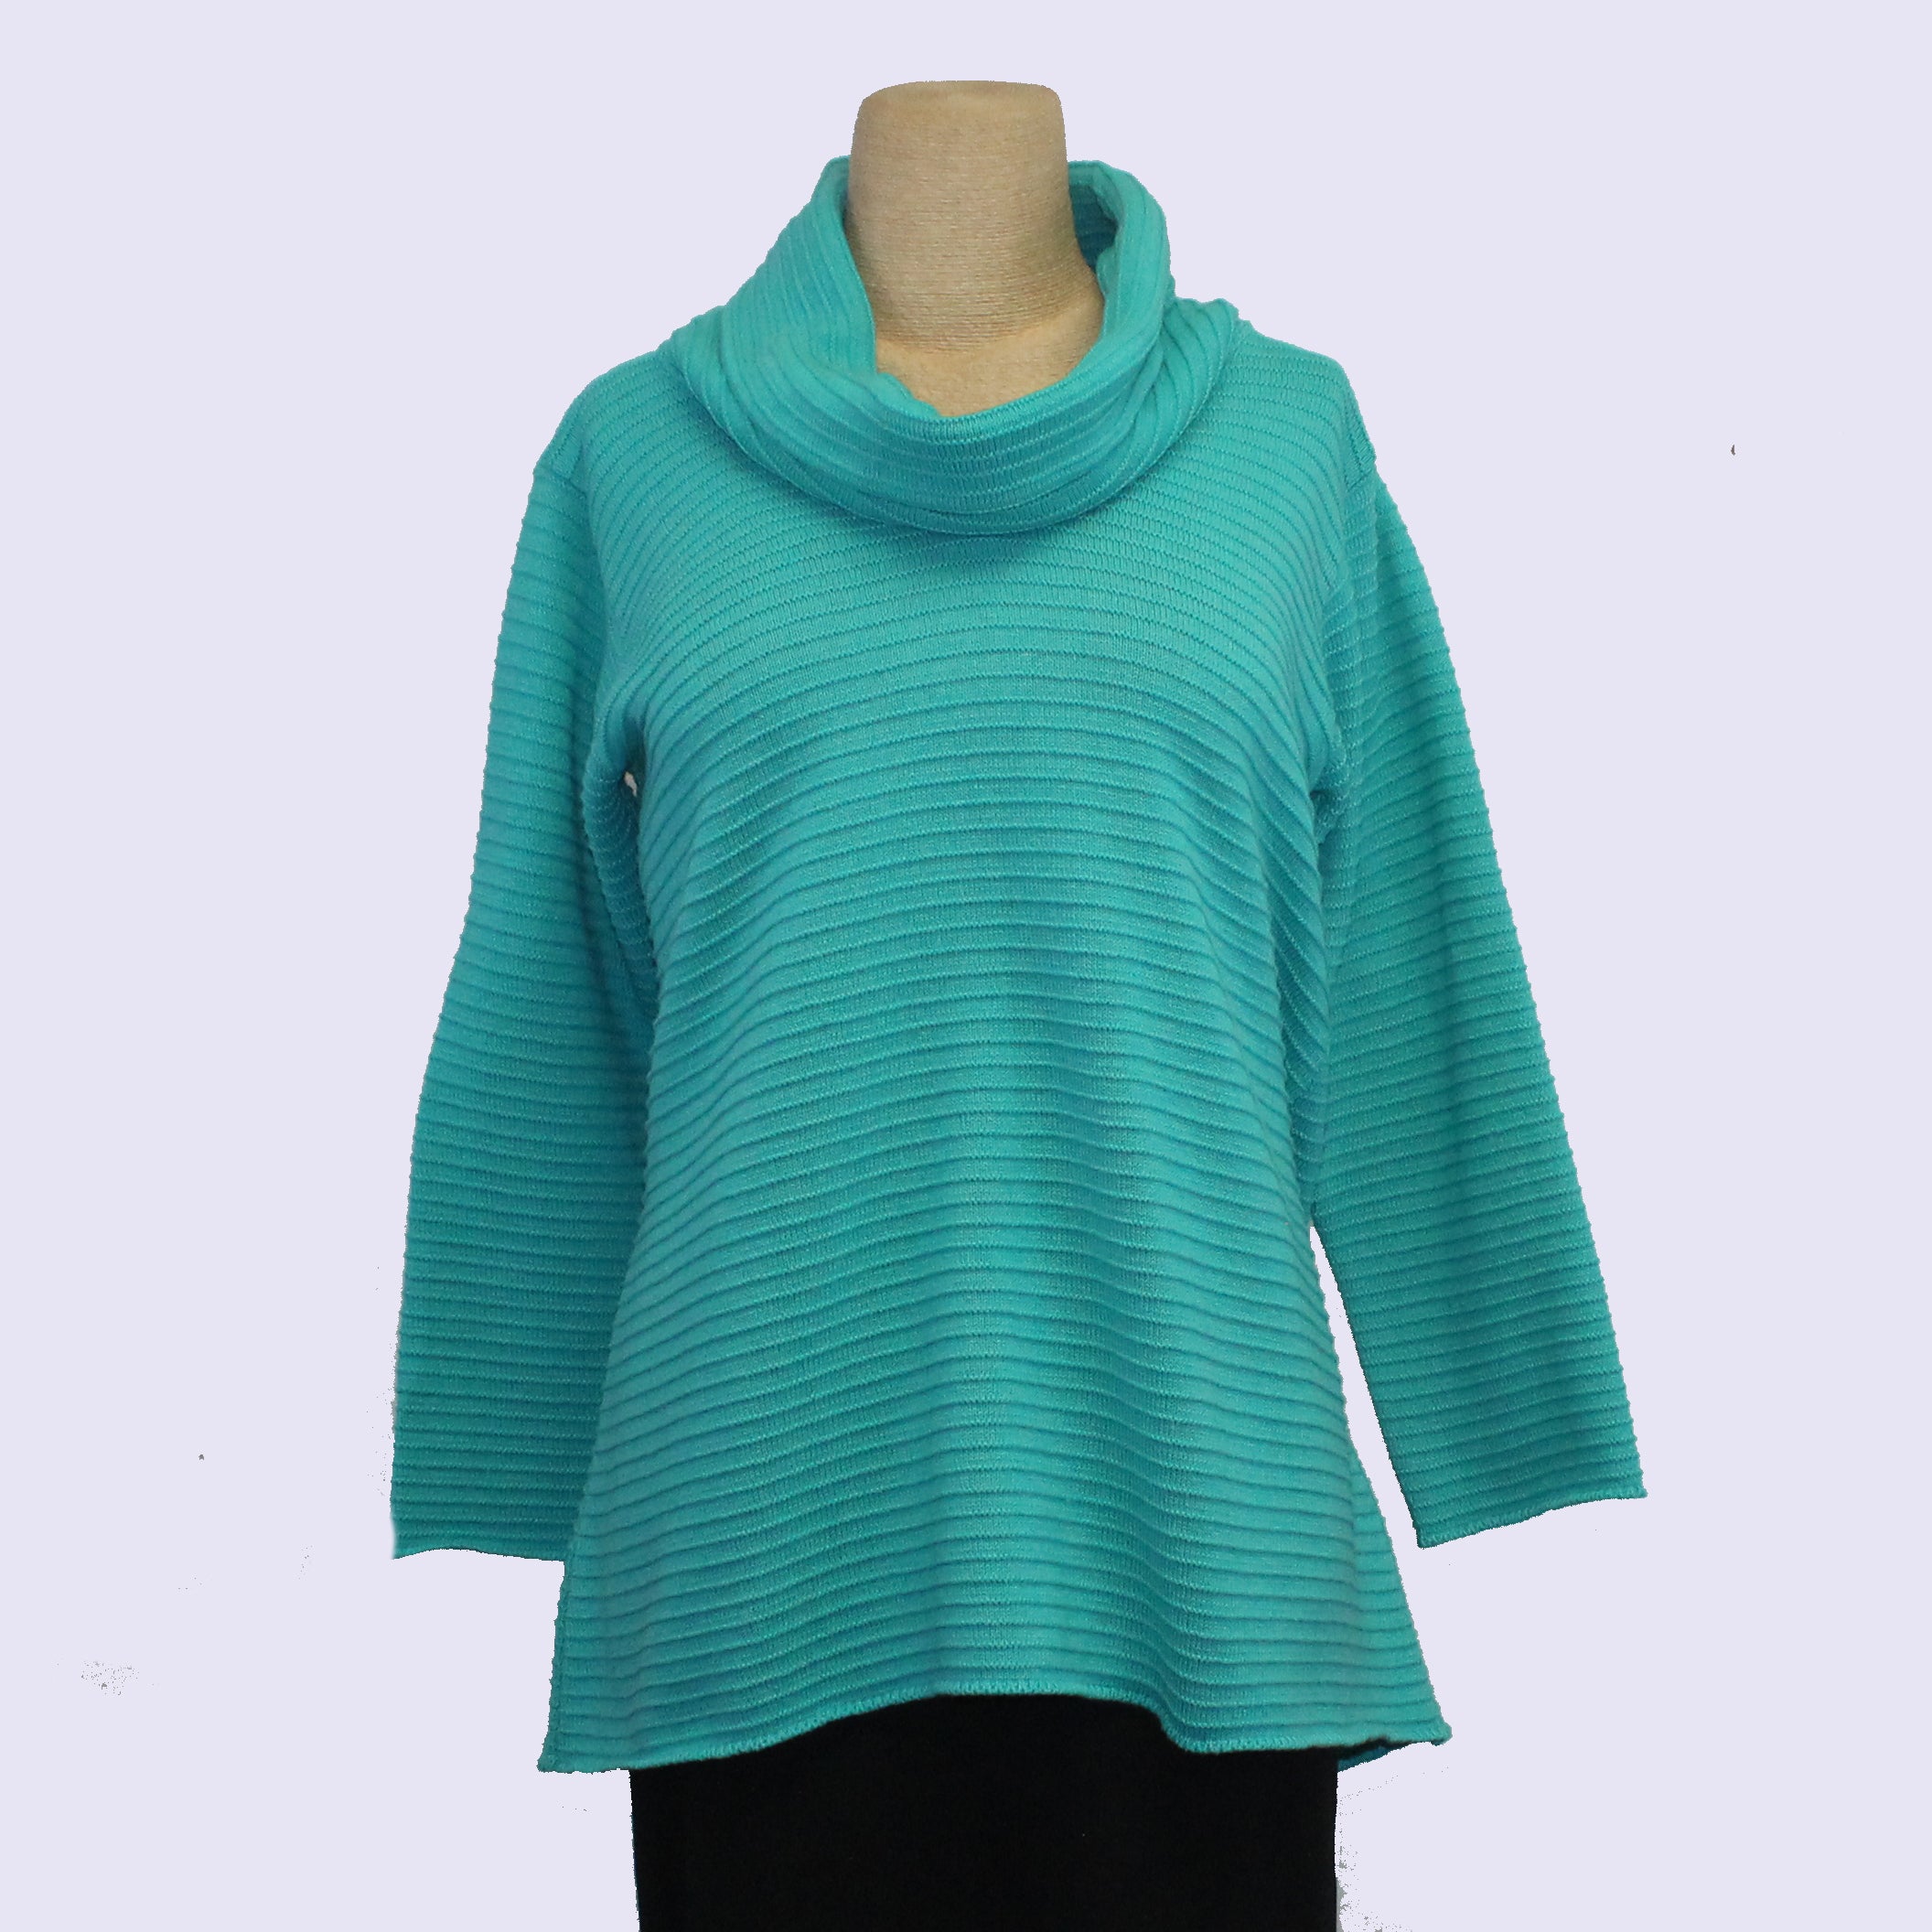 Margaret Winters Sweater, Turquoise XS, S